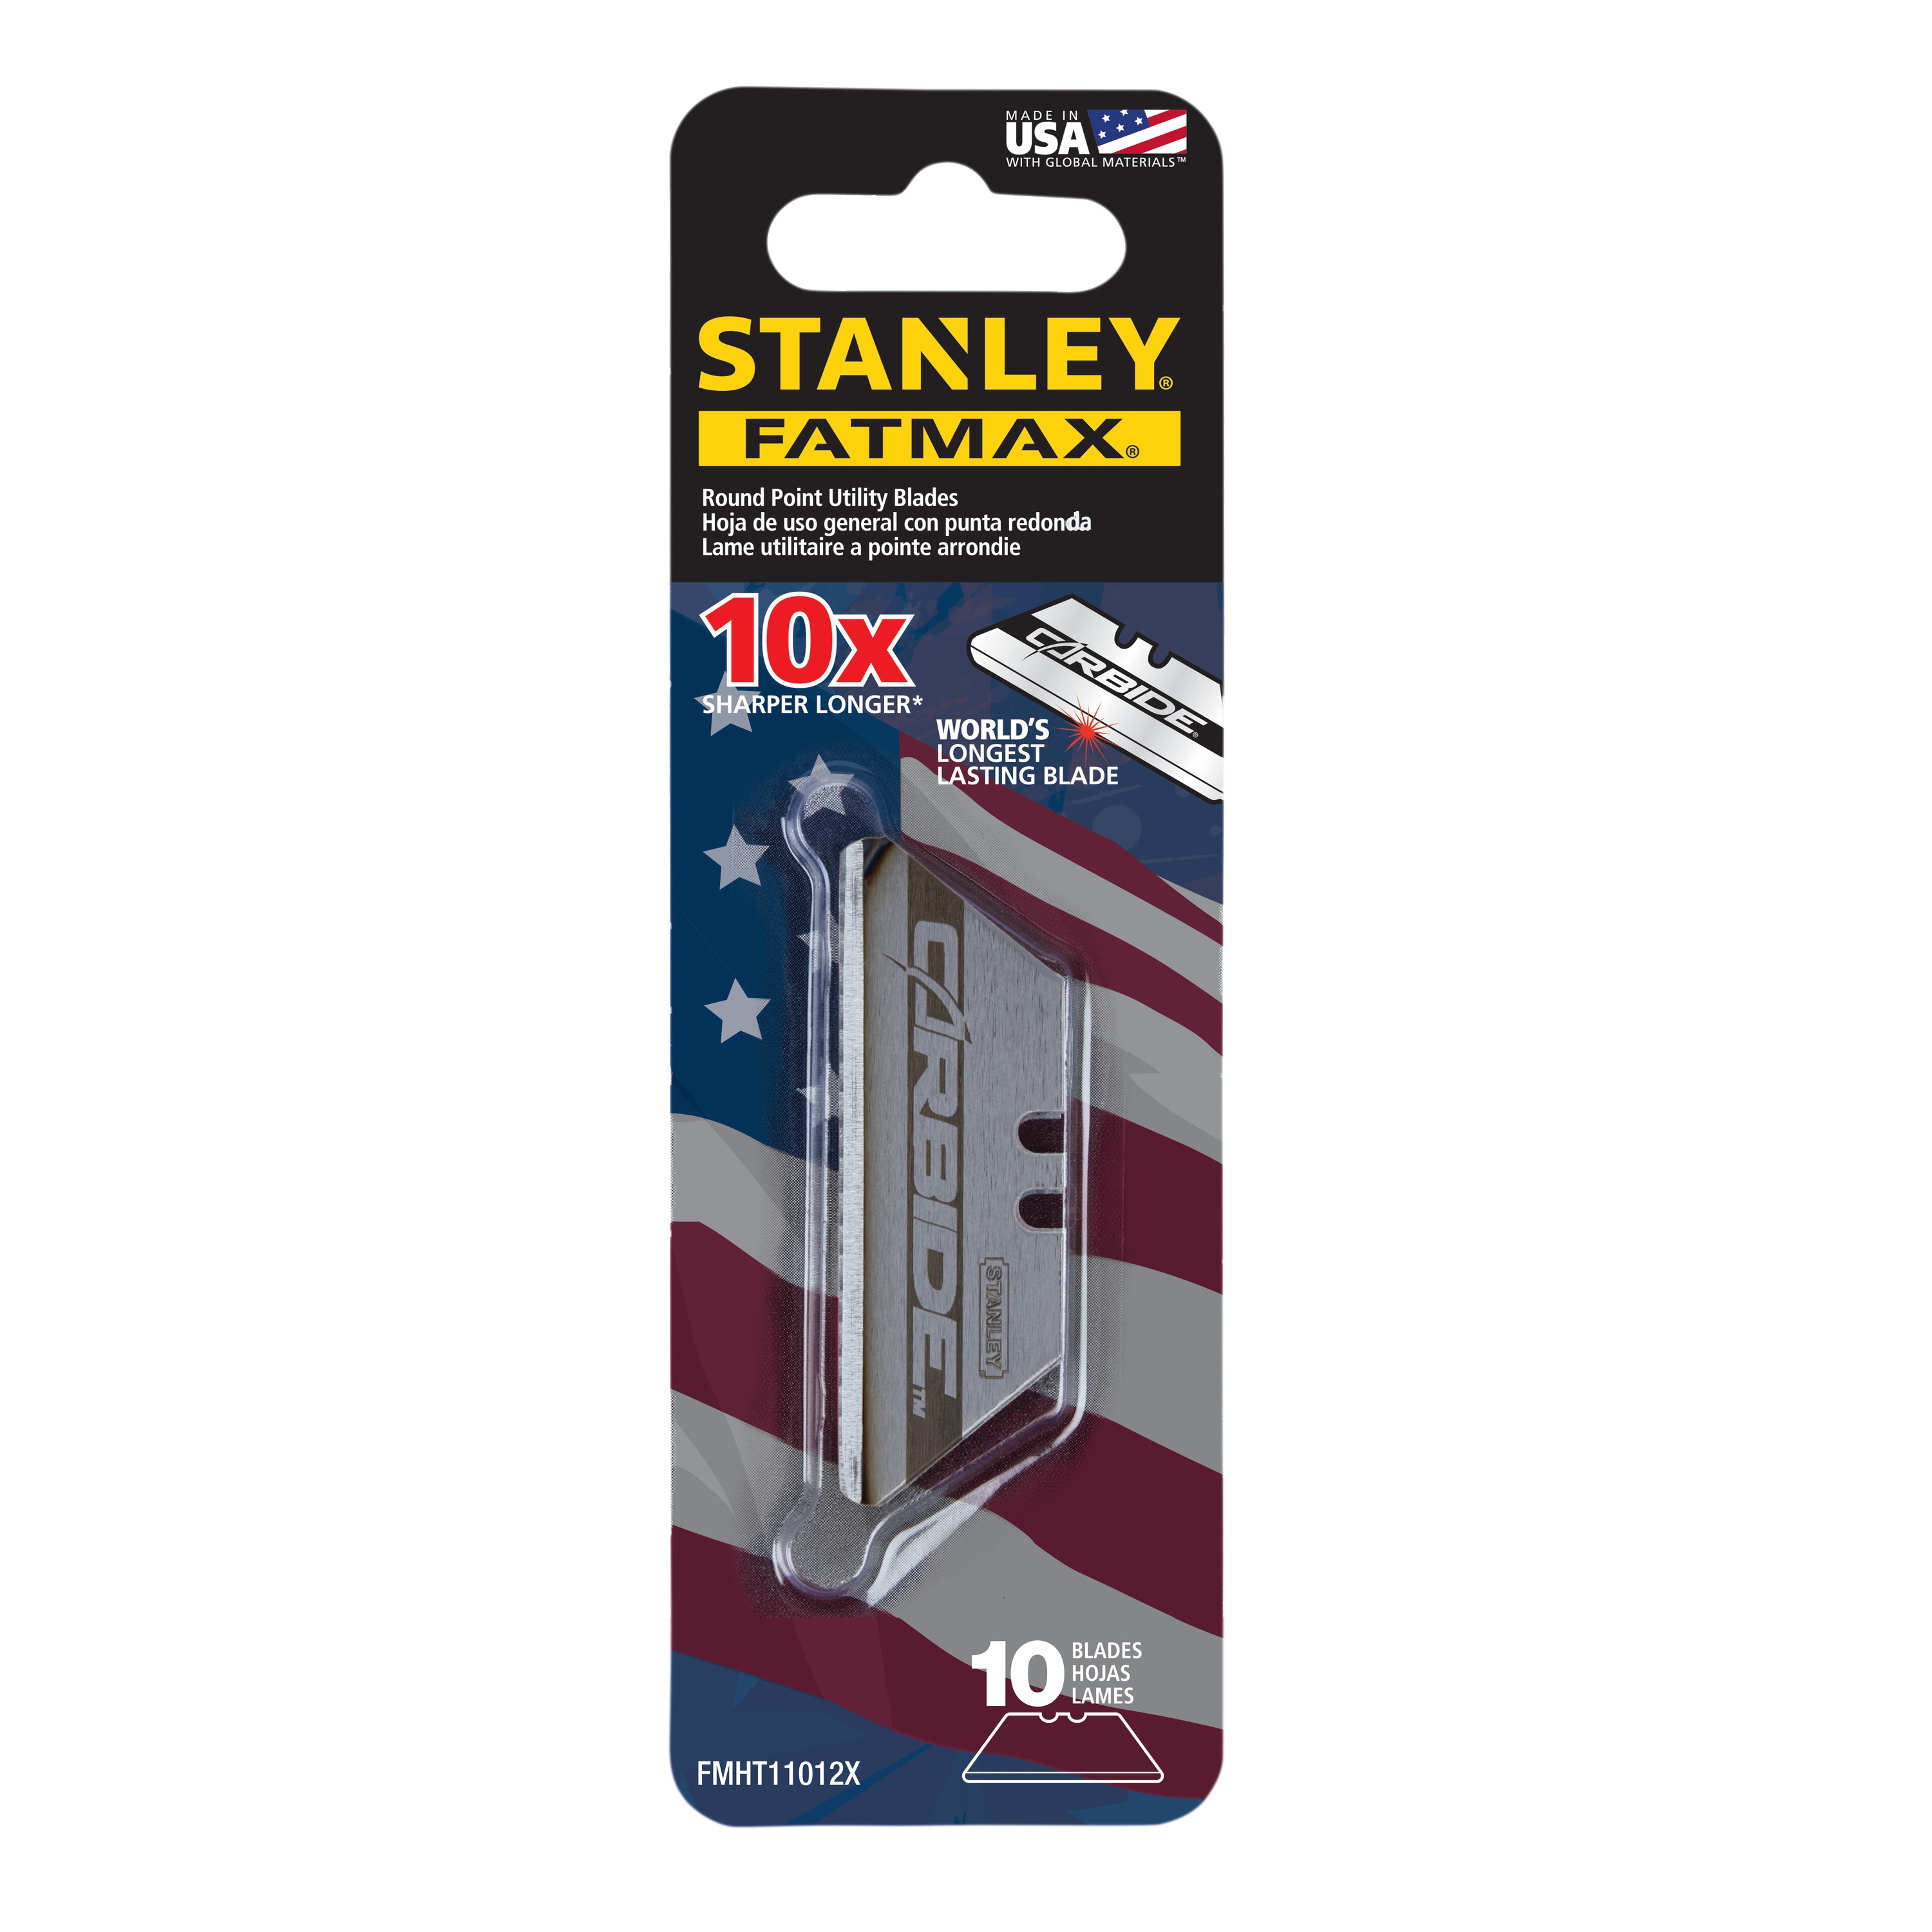 Stanley Tools - Carbide RoundPoint Utility Blades  10 Pack - FMHT11012X